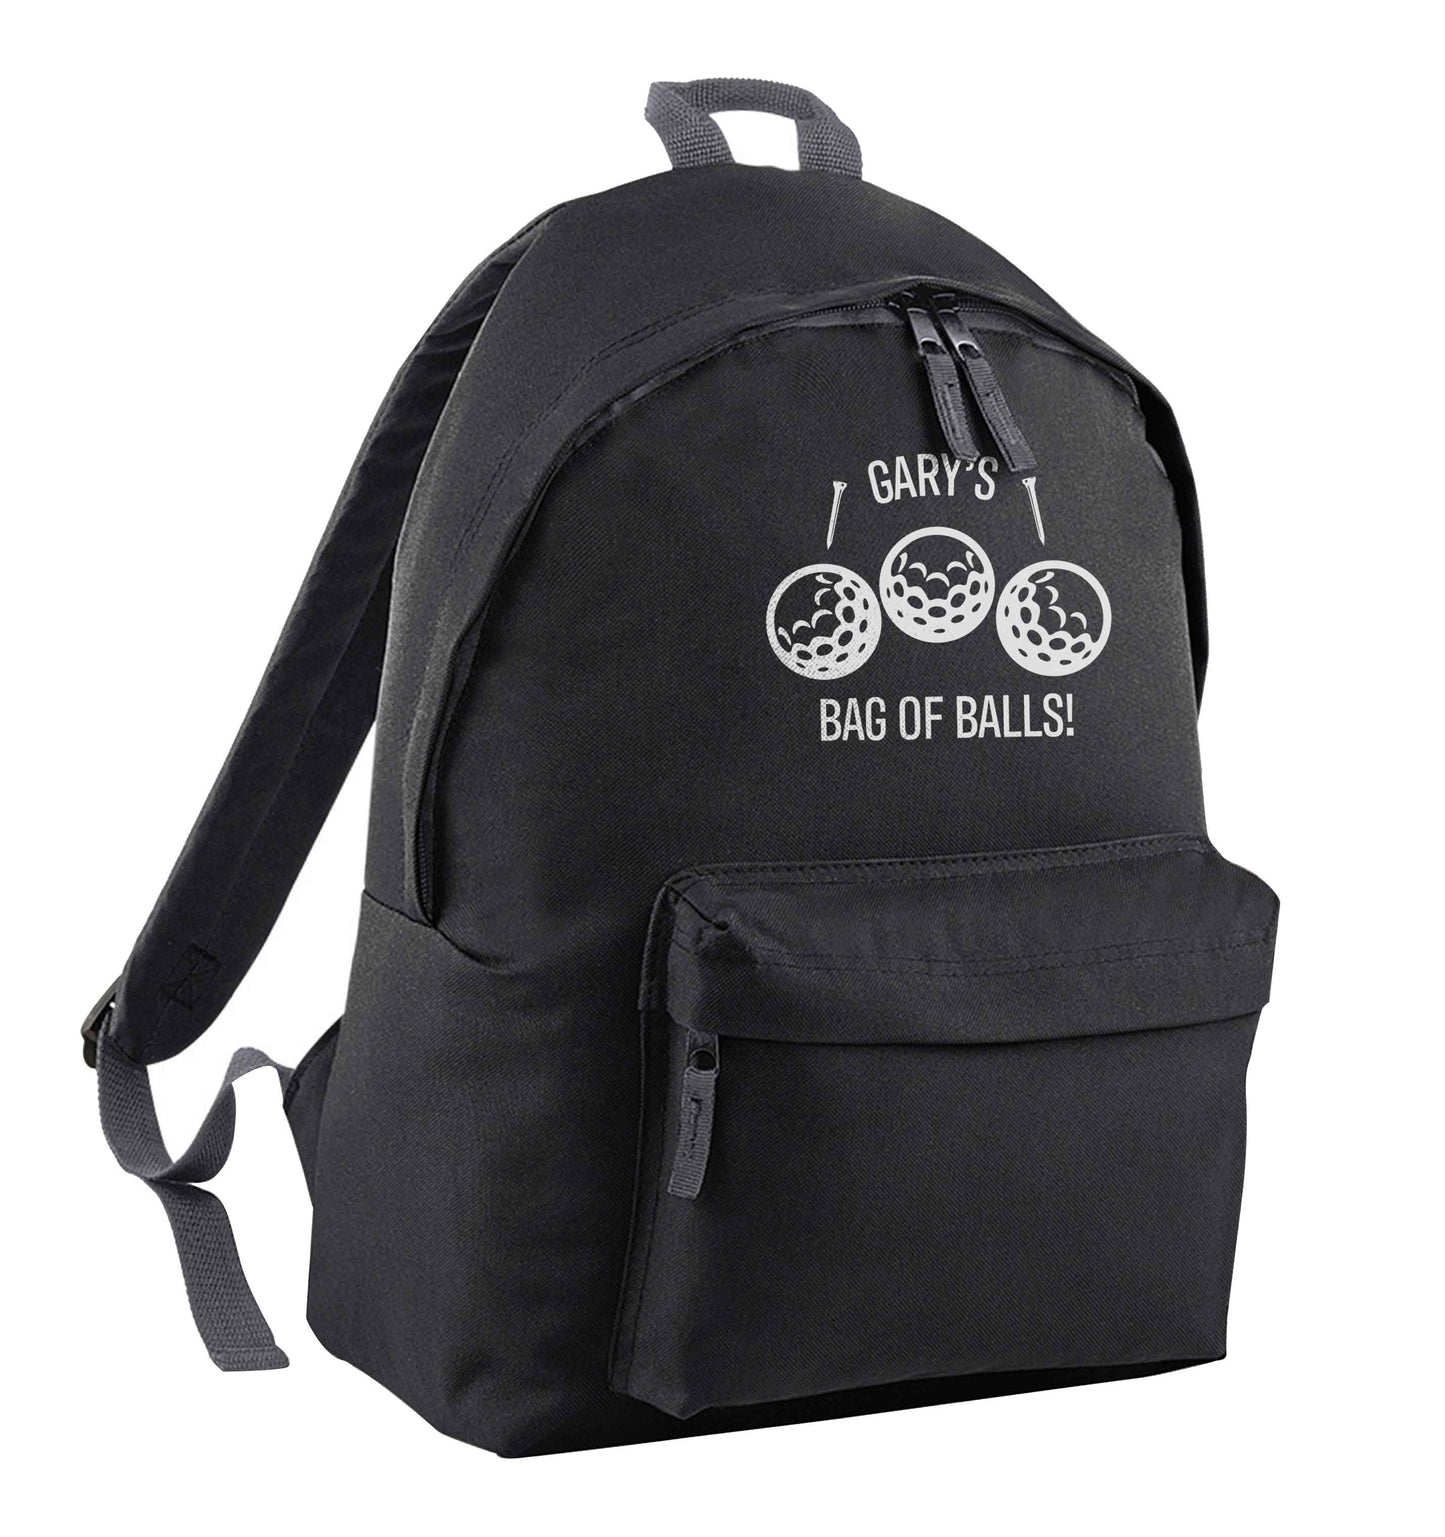 Personalised bag of golf balls black adults backpack